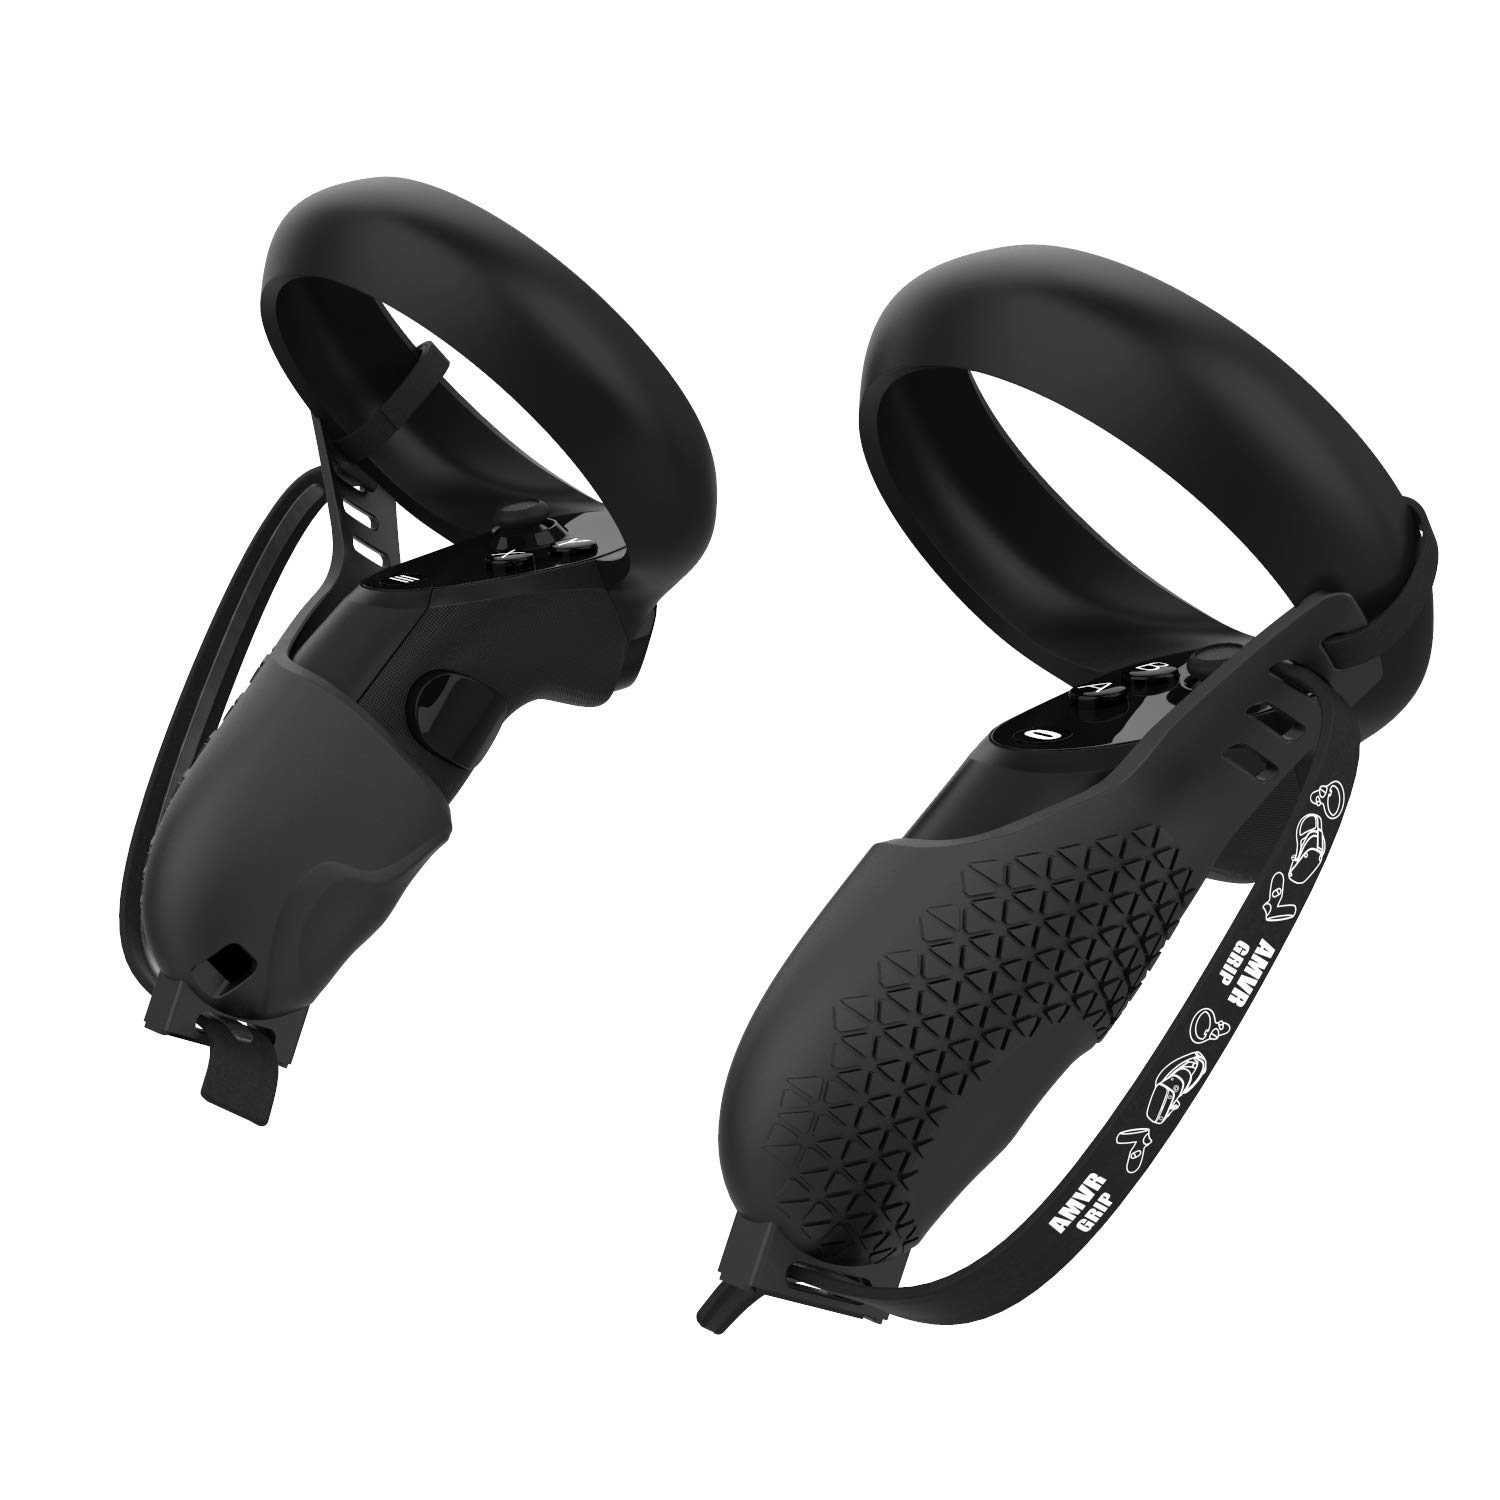 AMVR Touch Controller Grips - $25.99